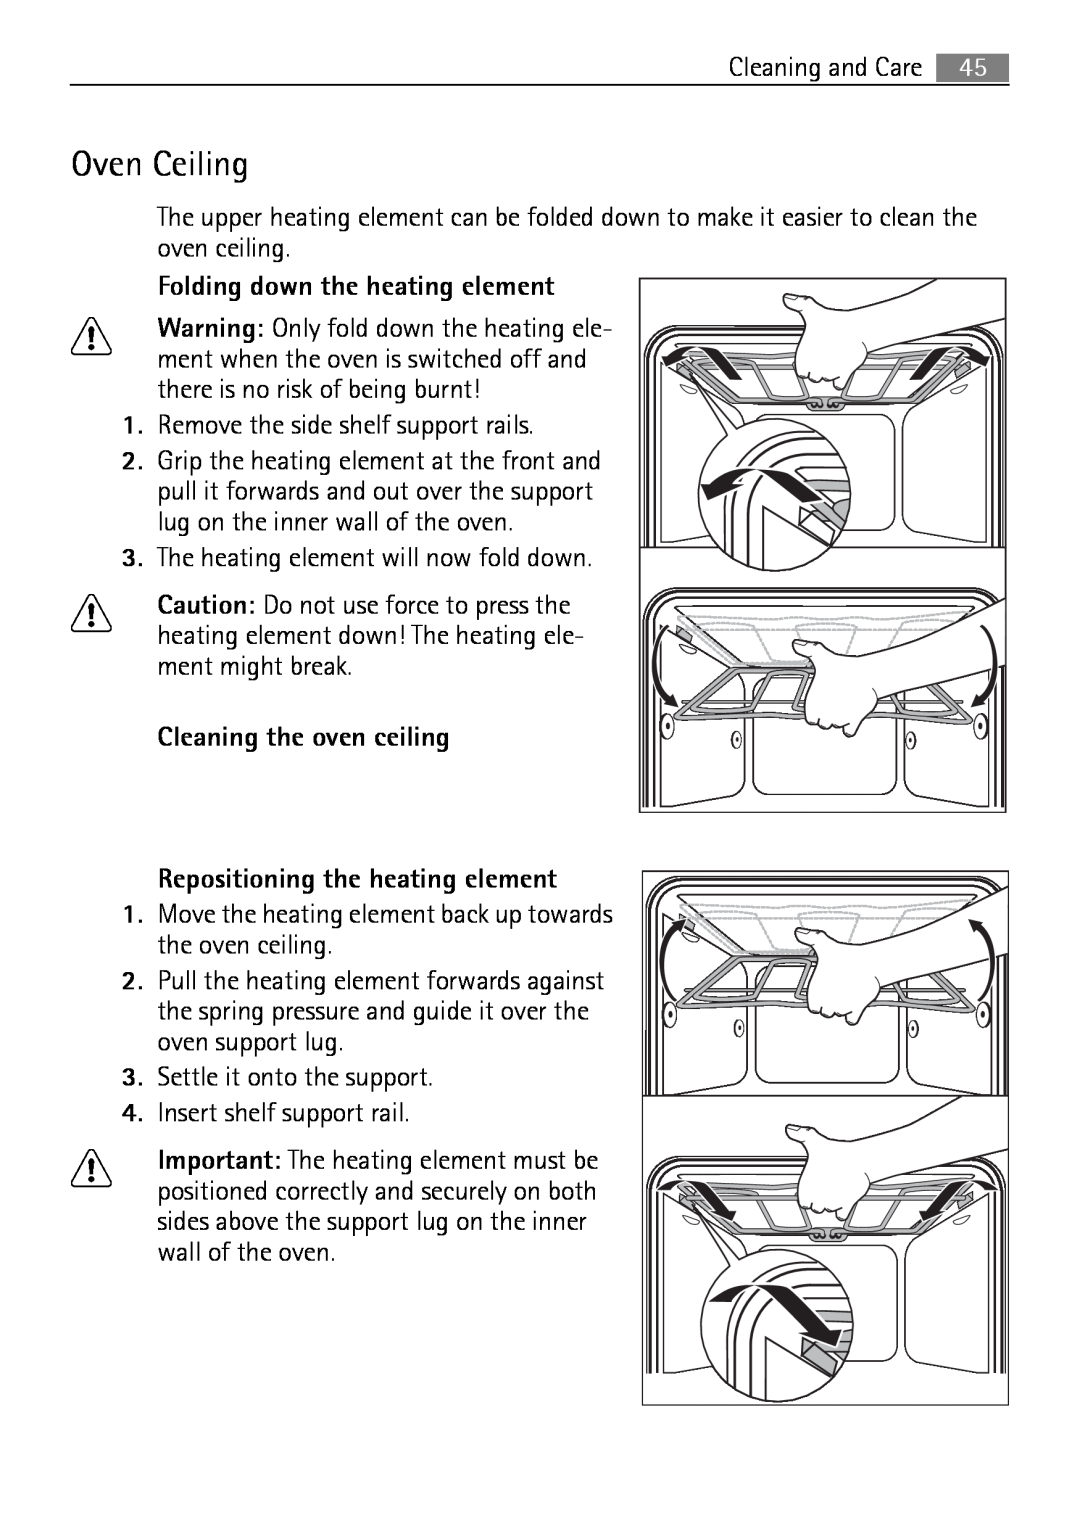 Electrolux E43012-5 user manual Oven Ceiling, Folding down the heating element 